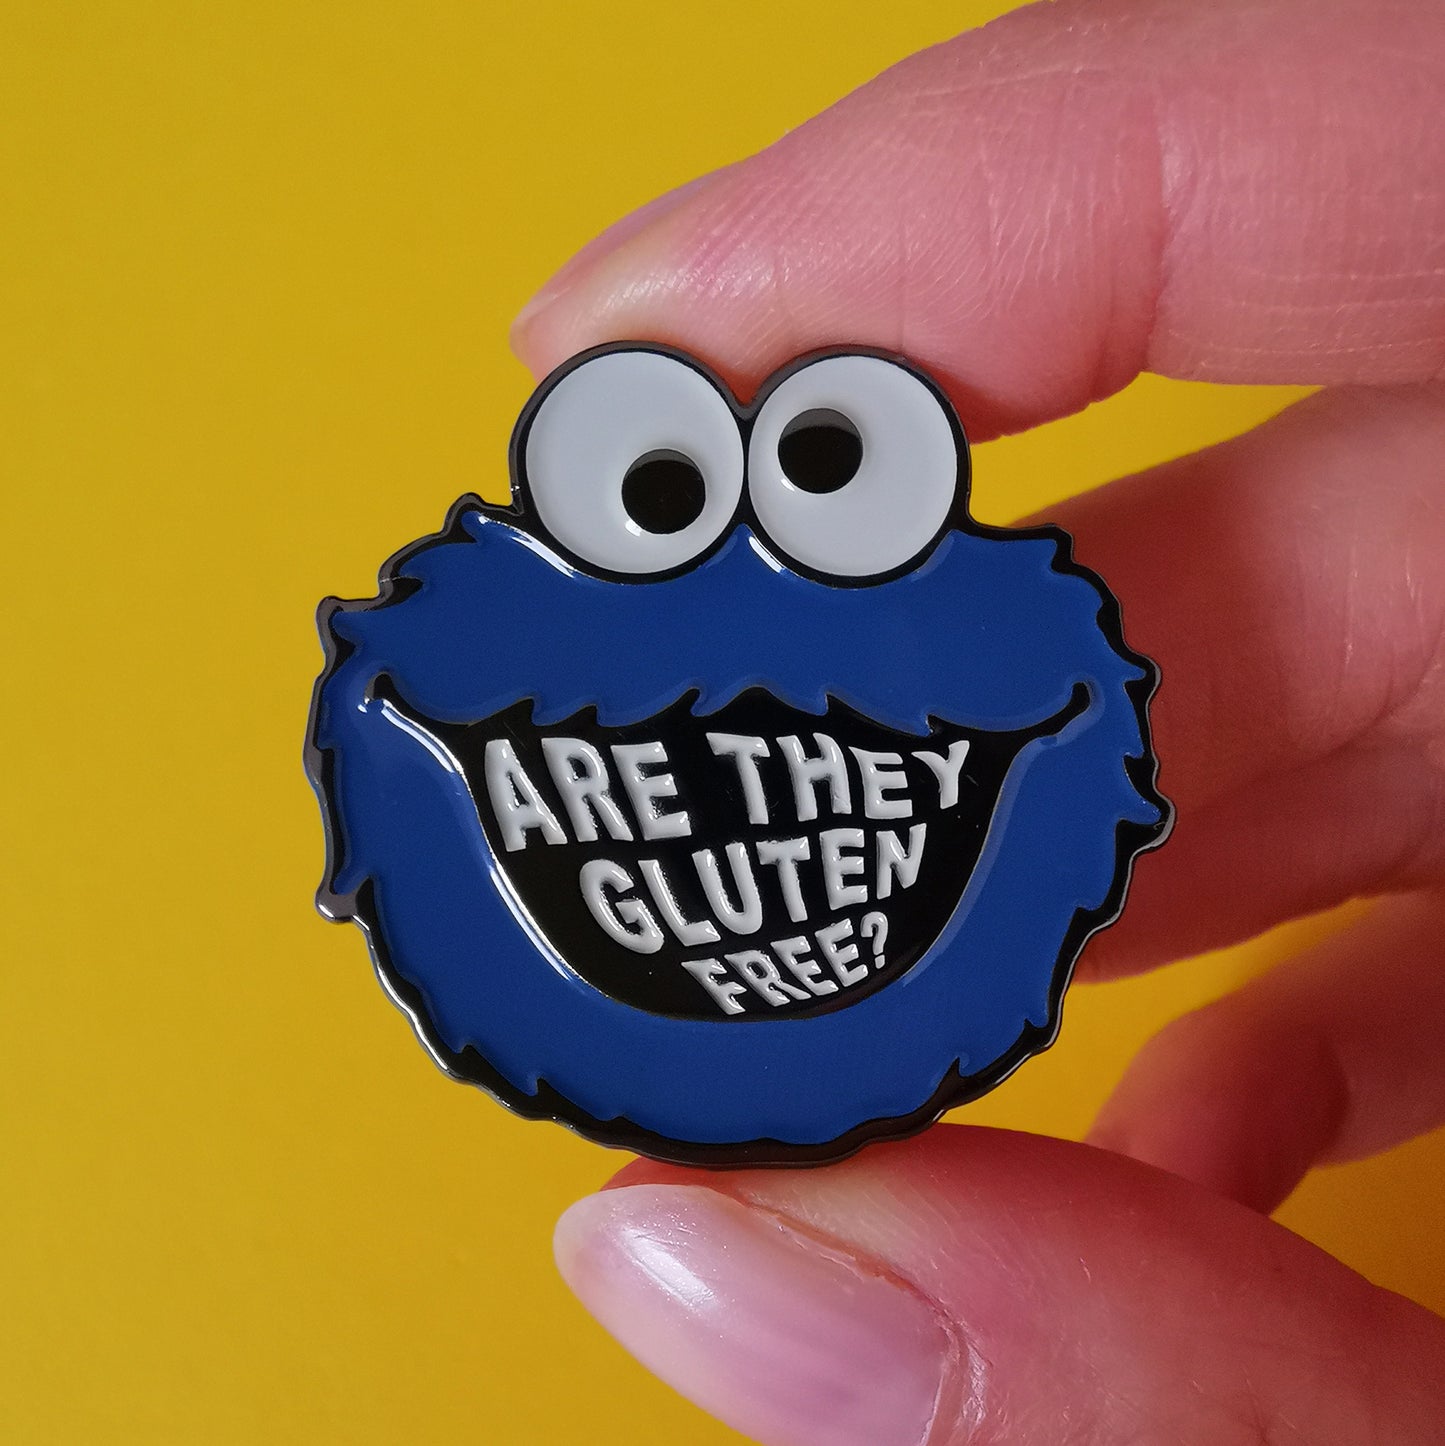 Are the cookies gluten free?